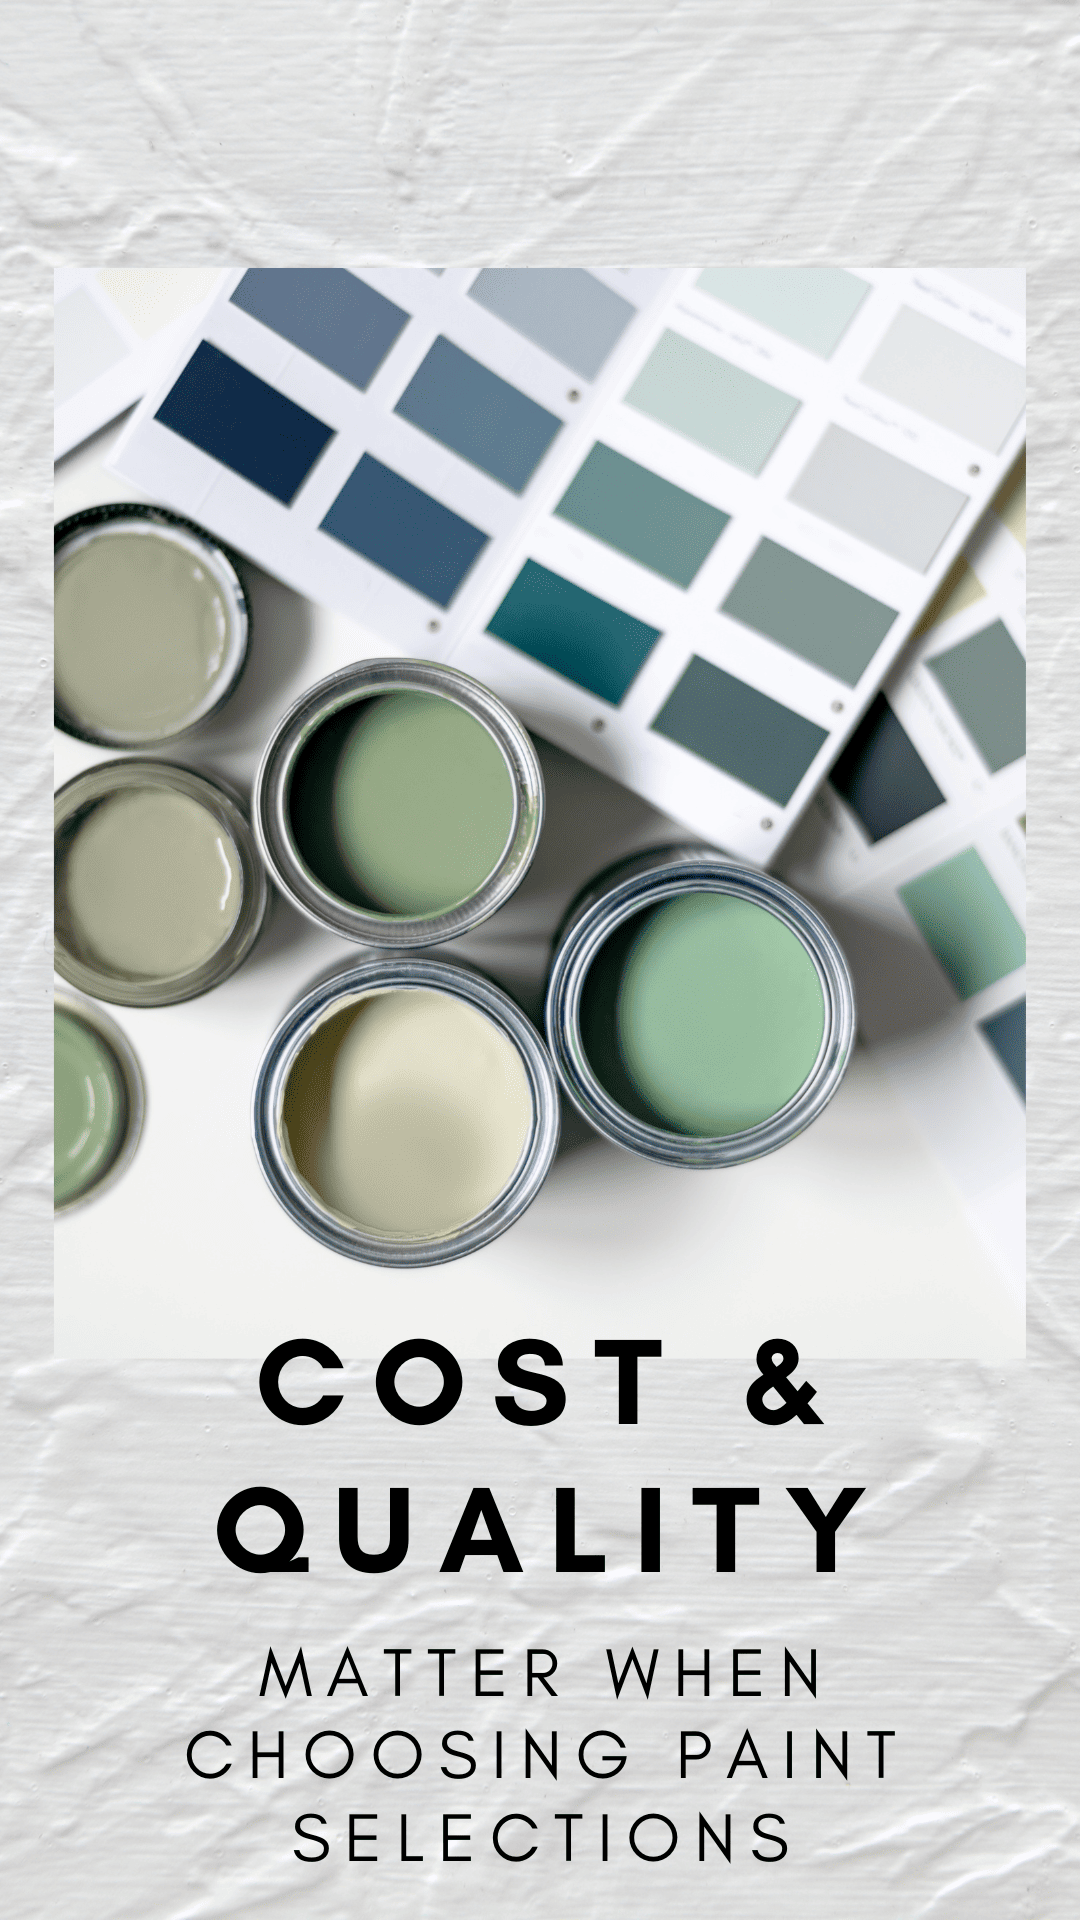 blog cost and quality matter when choosing paint selections